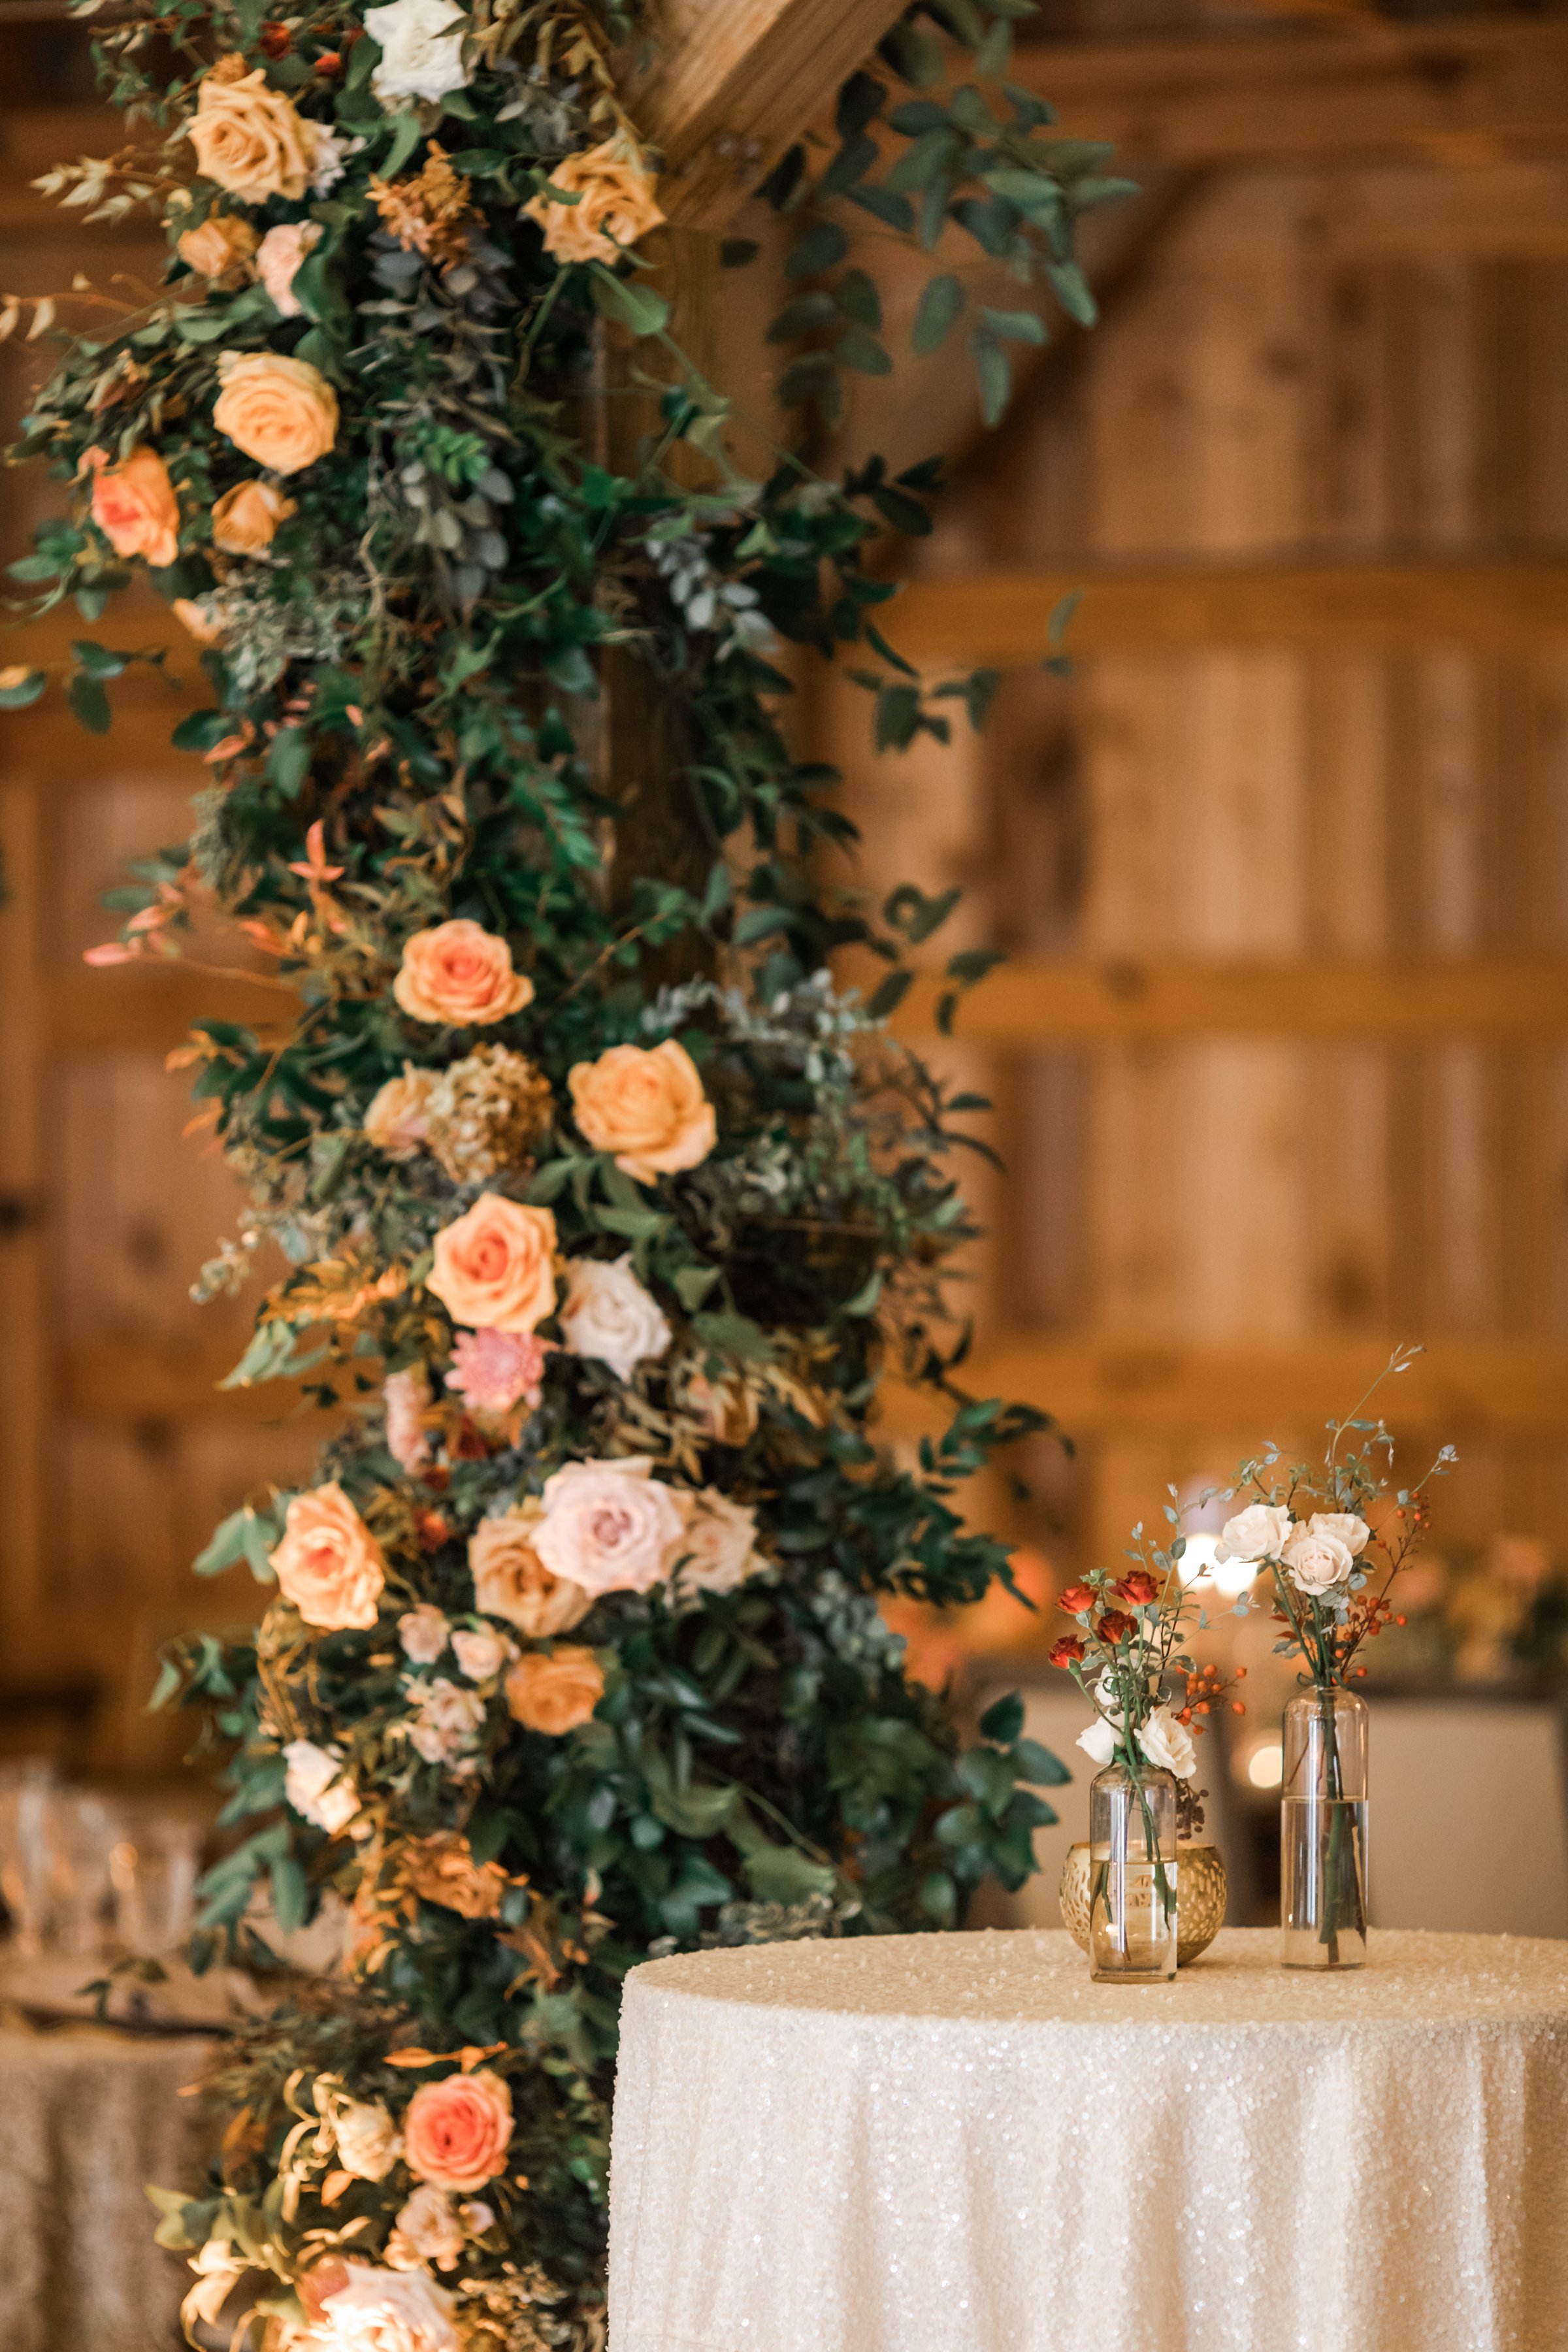 Climbing barn pole floral installations add pops of terra cotta, blush pink, and copper hues throughout the reception. Fall florals featuring garden roses and dahlias. Designed by Rosemary and Finch in Nashville, TN.